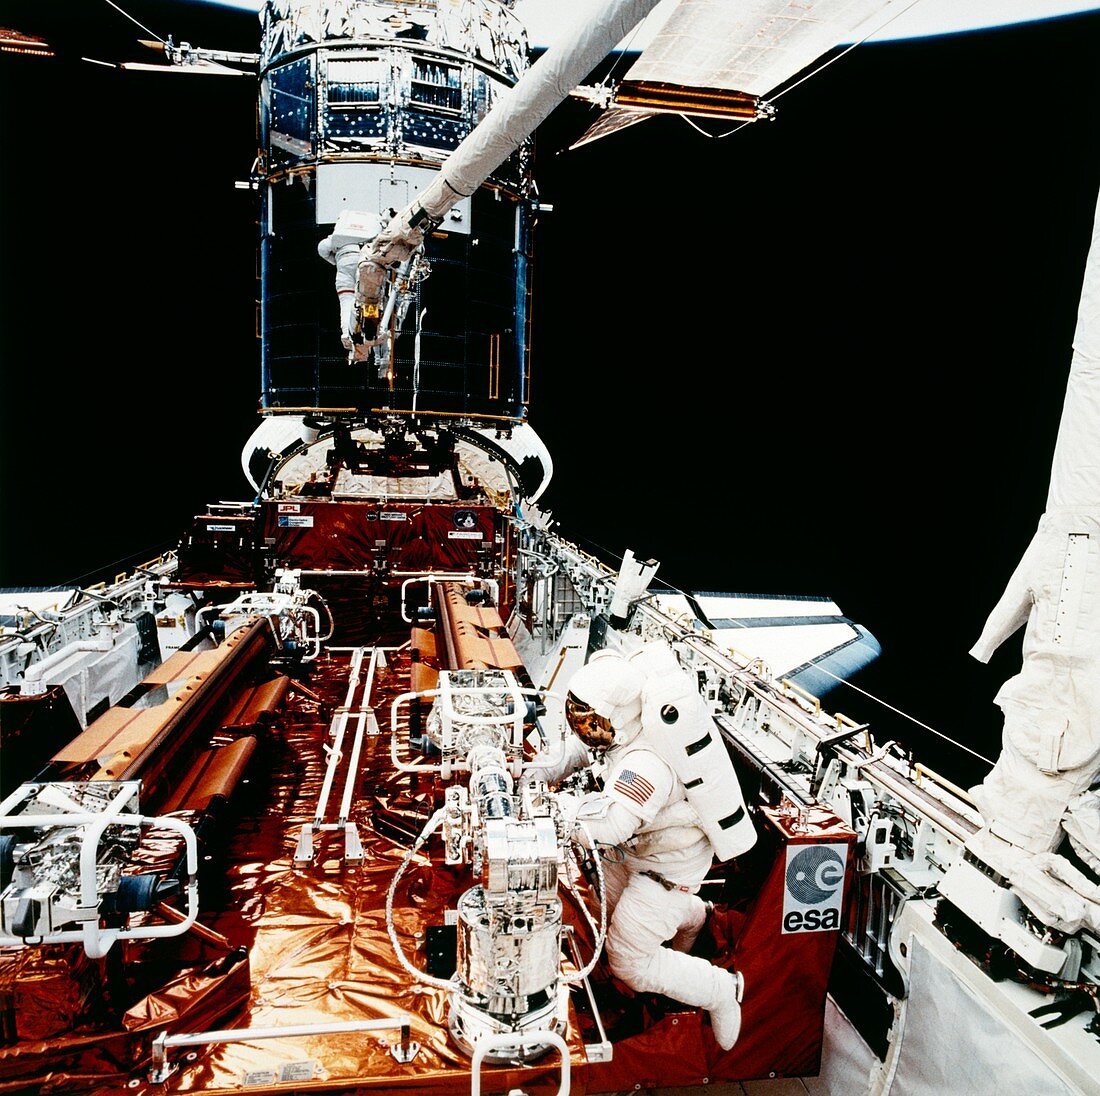 Astronauts seen during HST servicing,STS-61